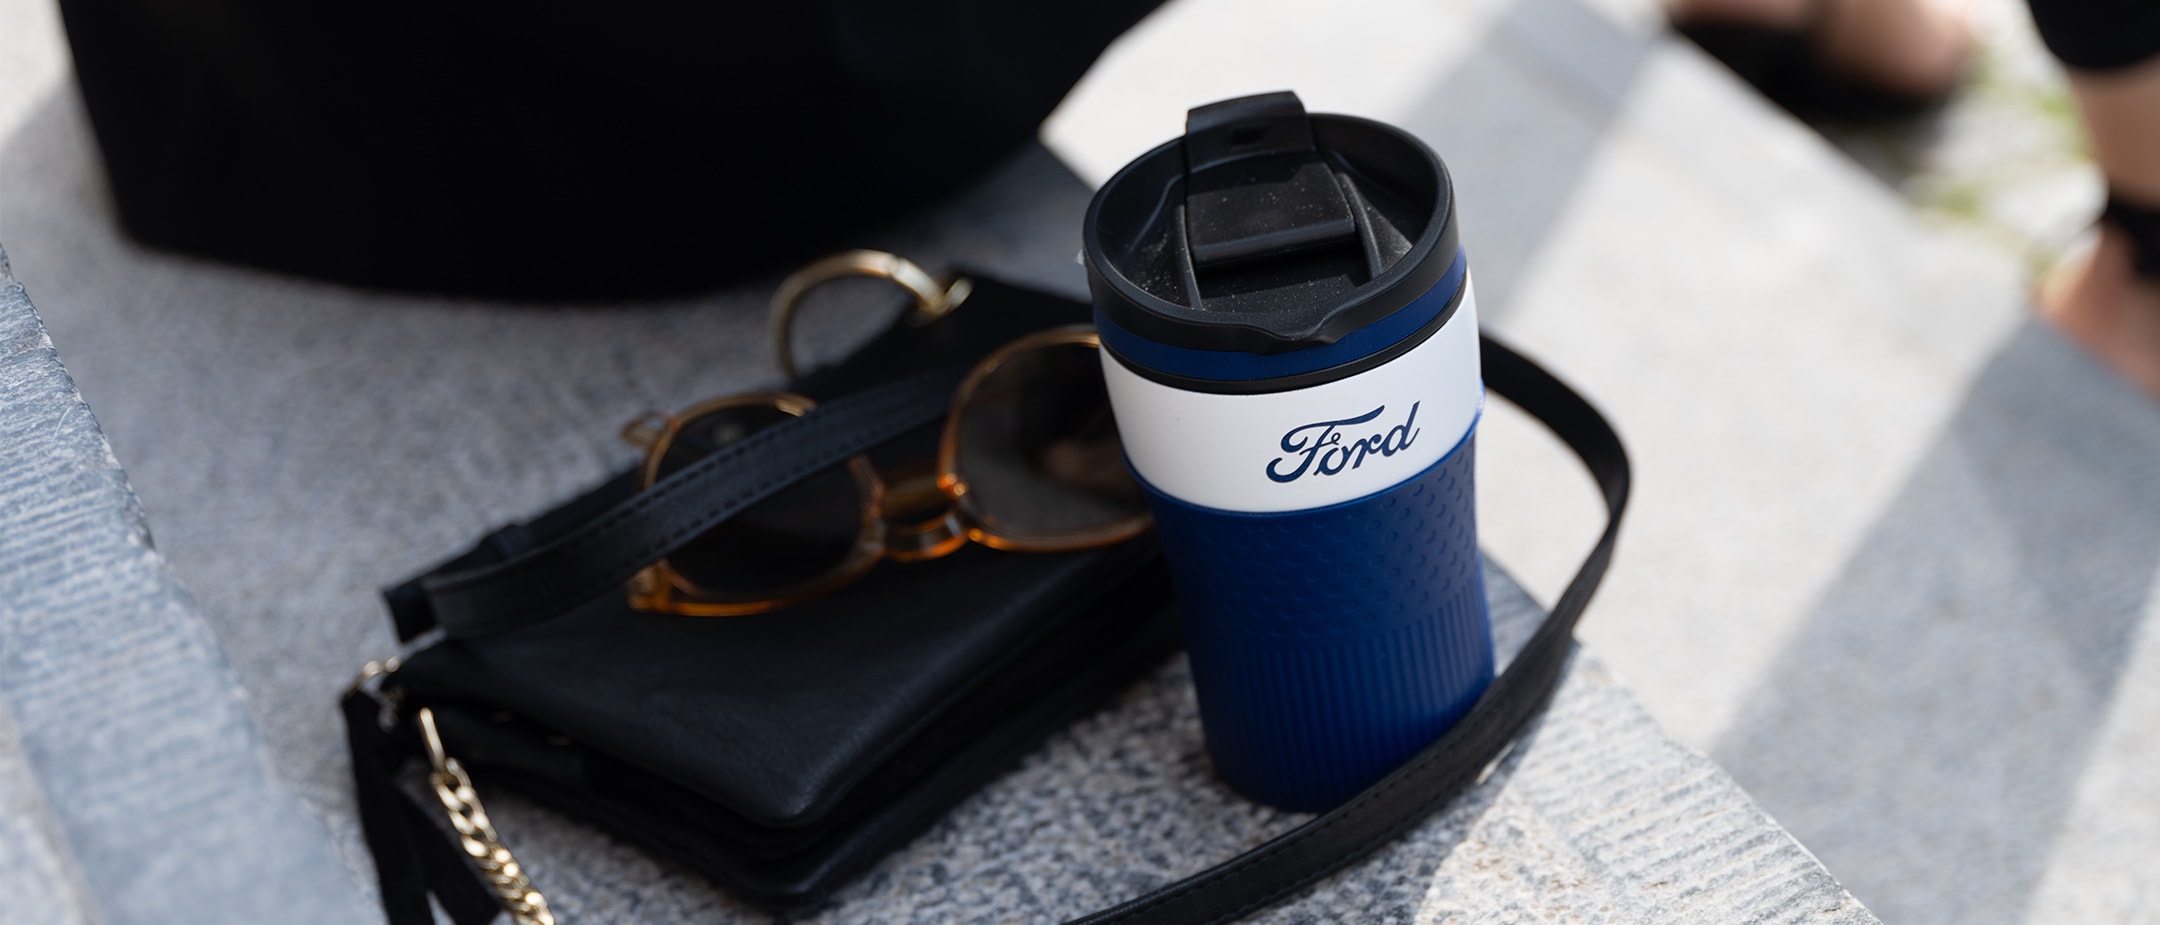 Ford coffee holder